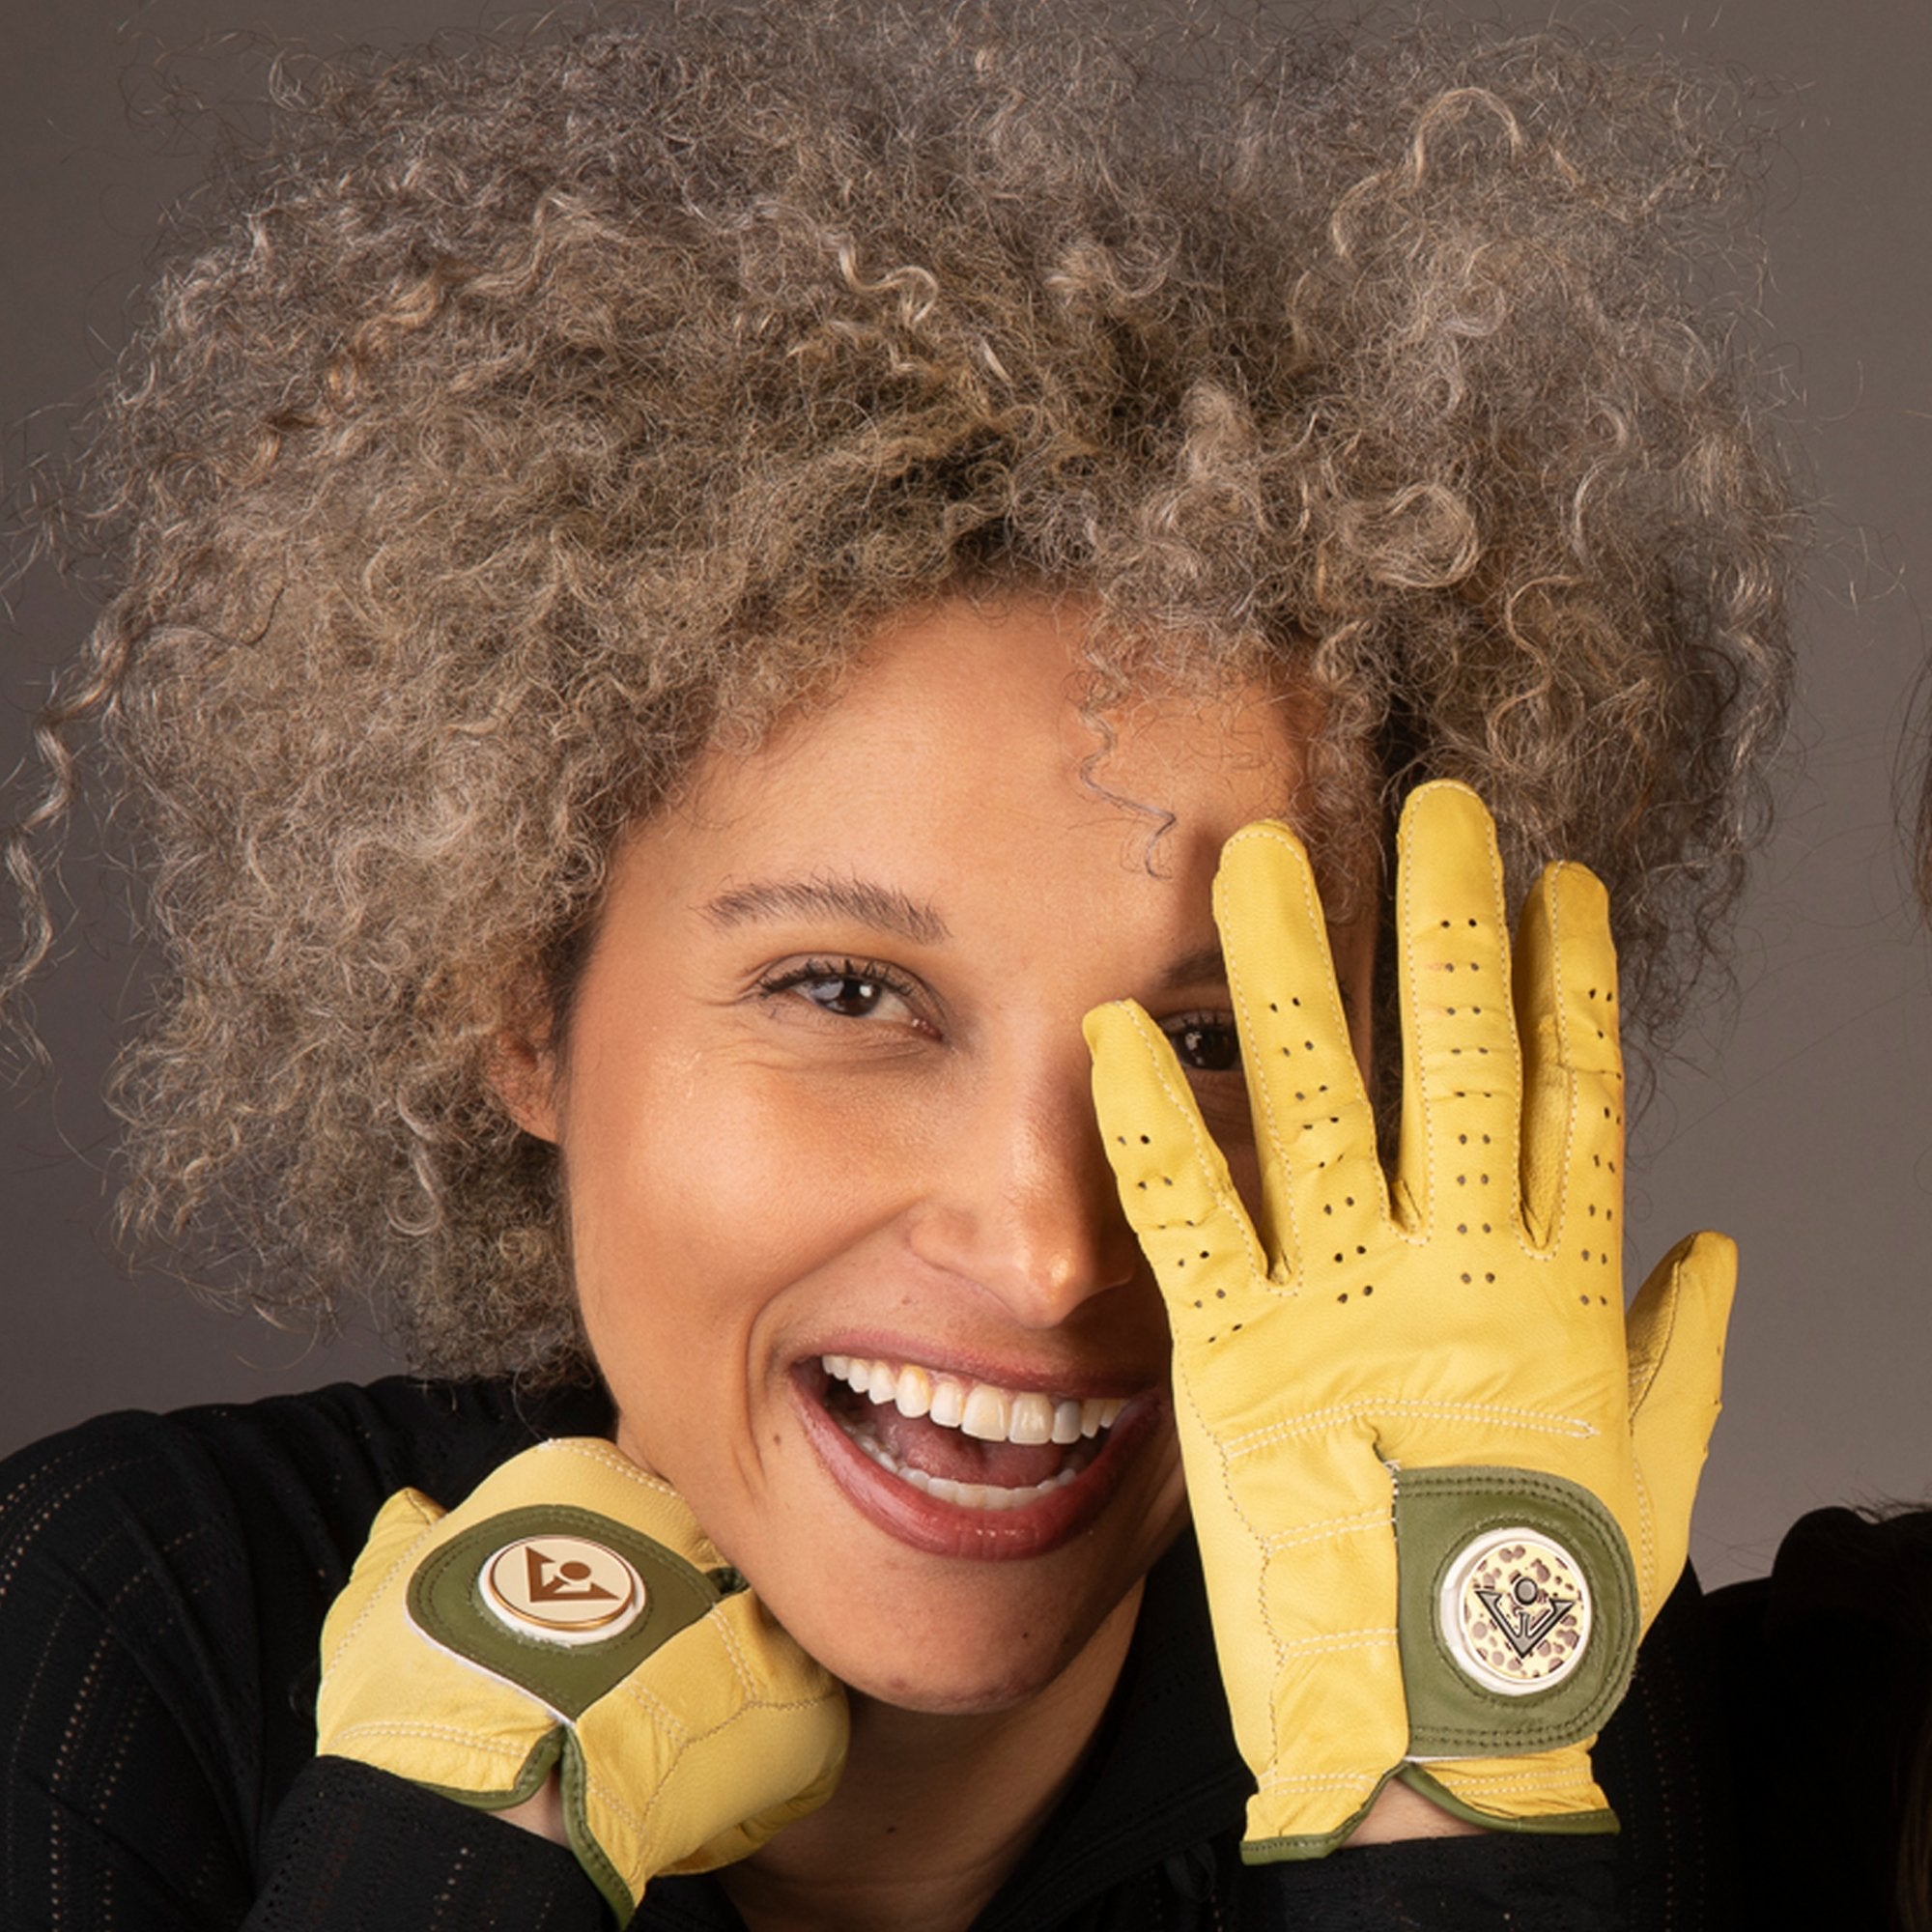 Radiant woman with curly hair smiling broadly, wearing yellow leather golf gloves with green accents and distinctive circular emblems on the cuffs.